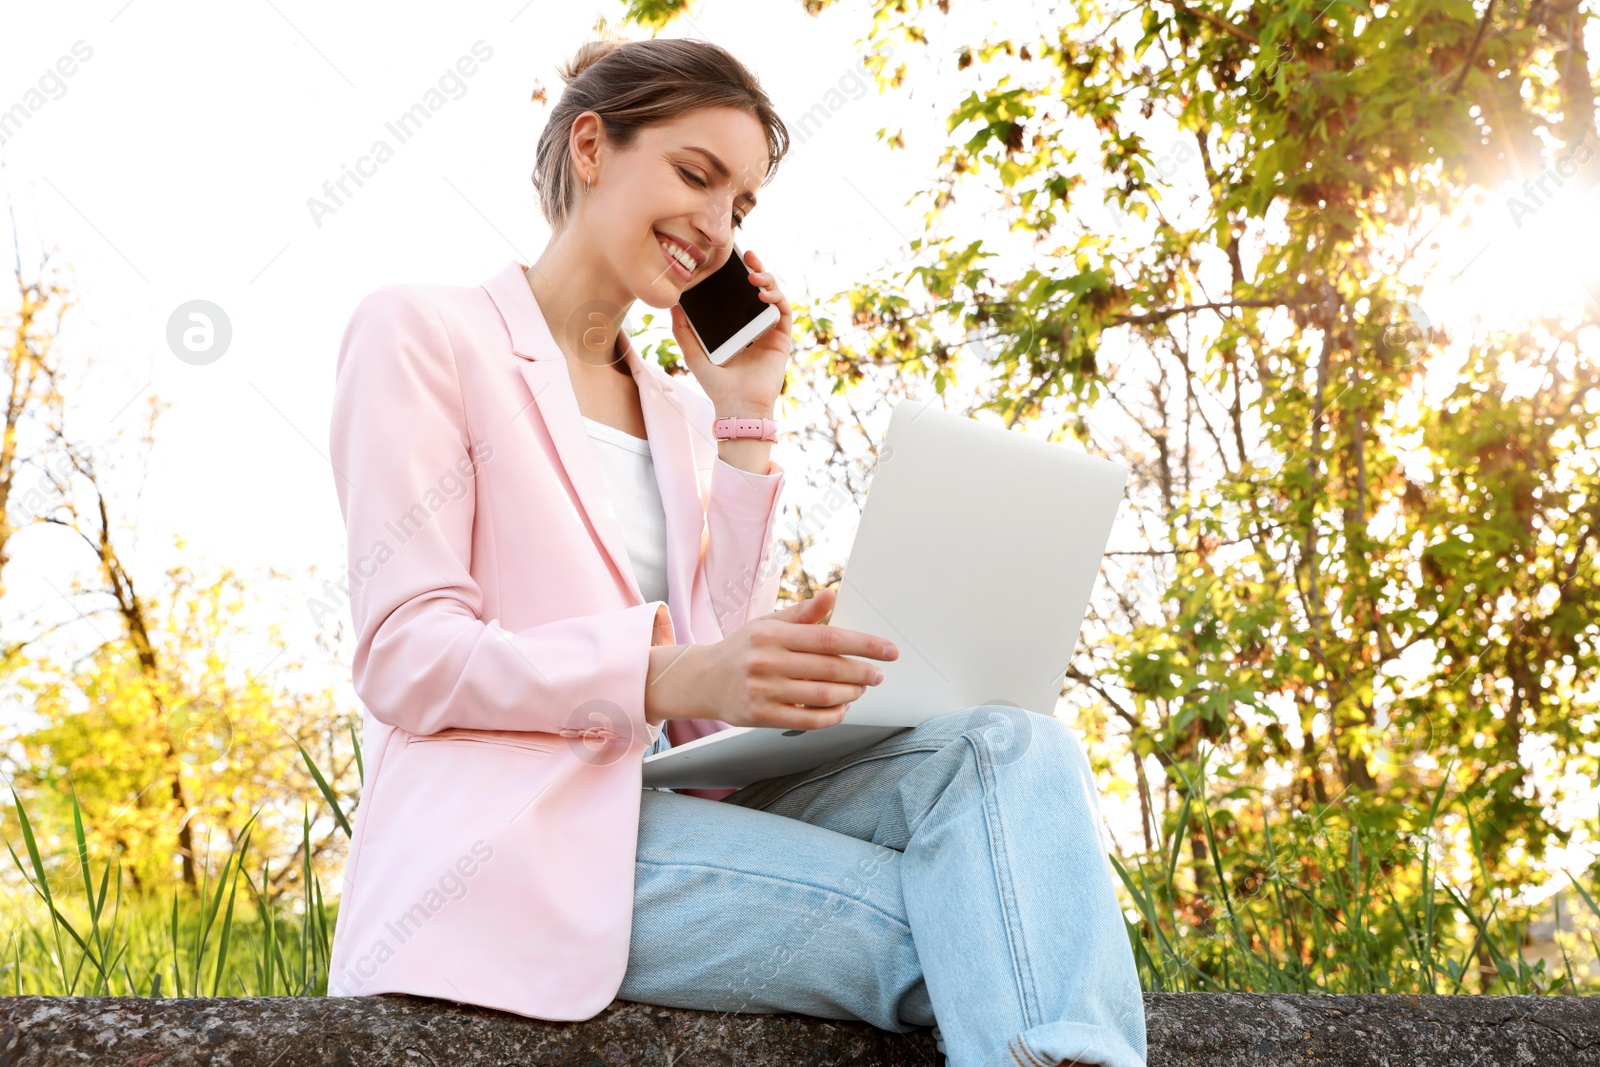 Image of Happy young woman talking on phone while using laptop outdoors